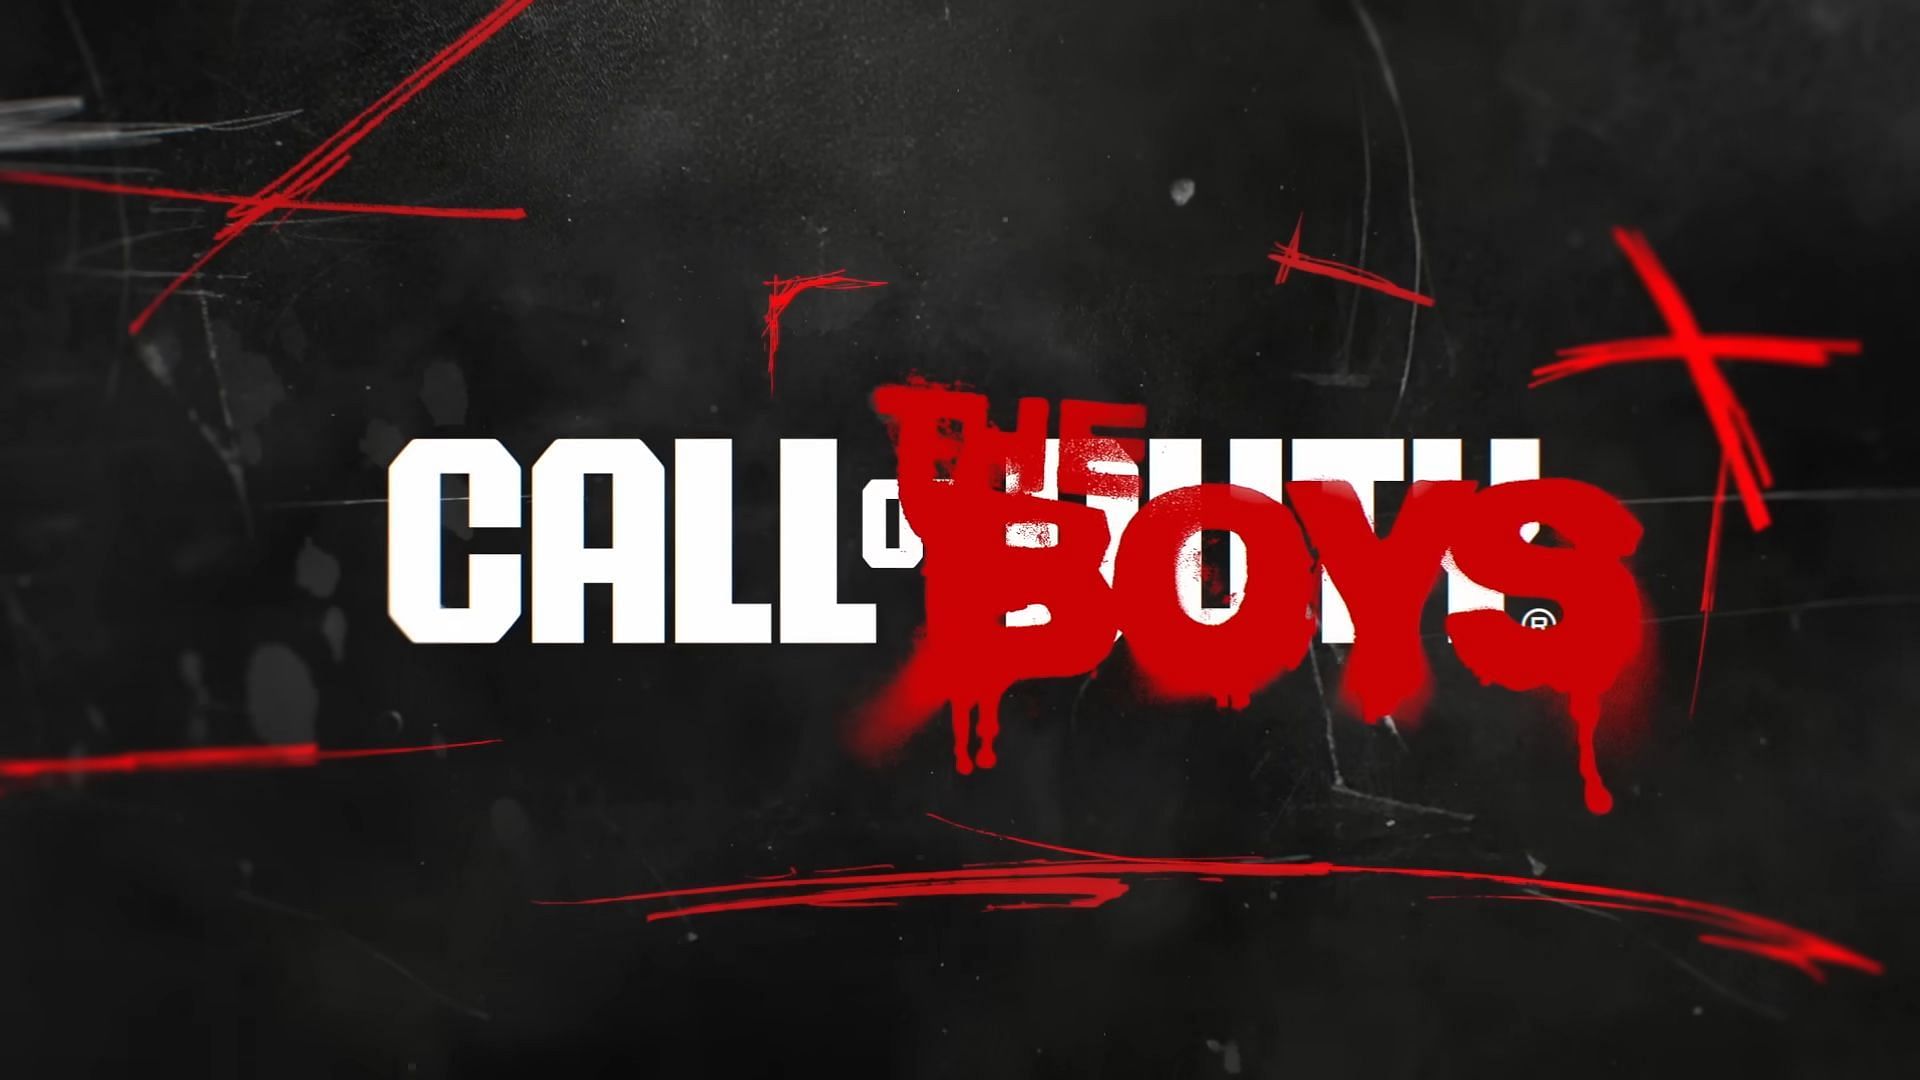 The latest season of The Boys refrenced Call of Duty with some hidden easter eggs, Call of Duty easter eggs, The Boys Season 4